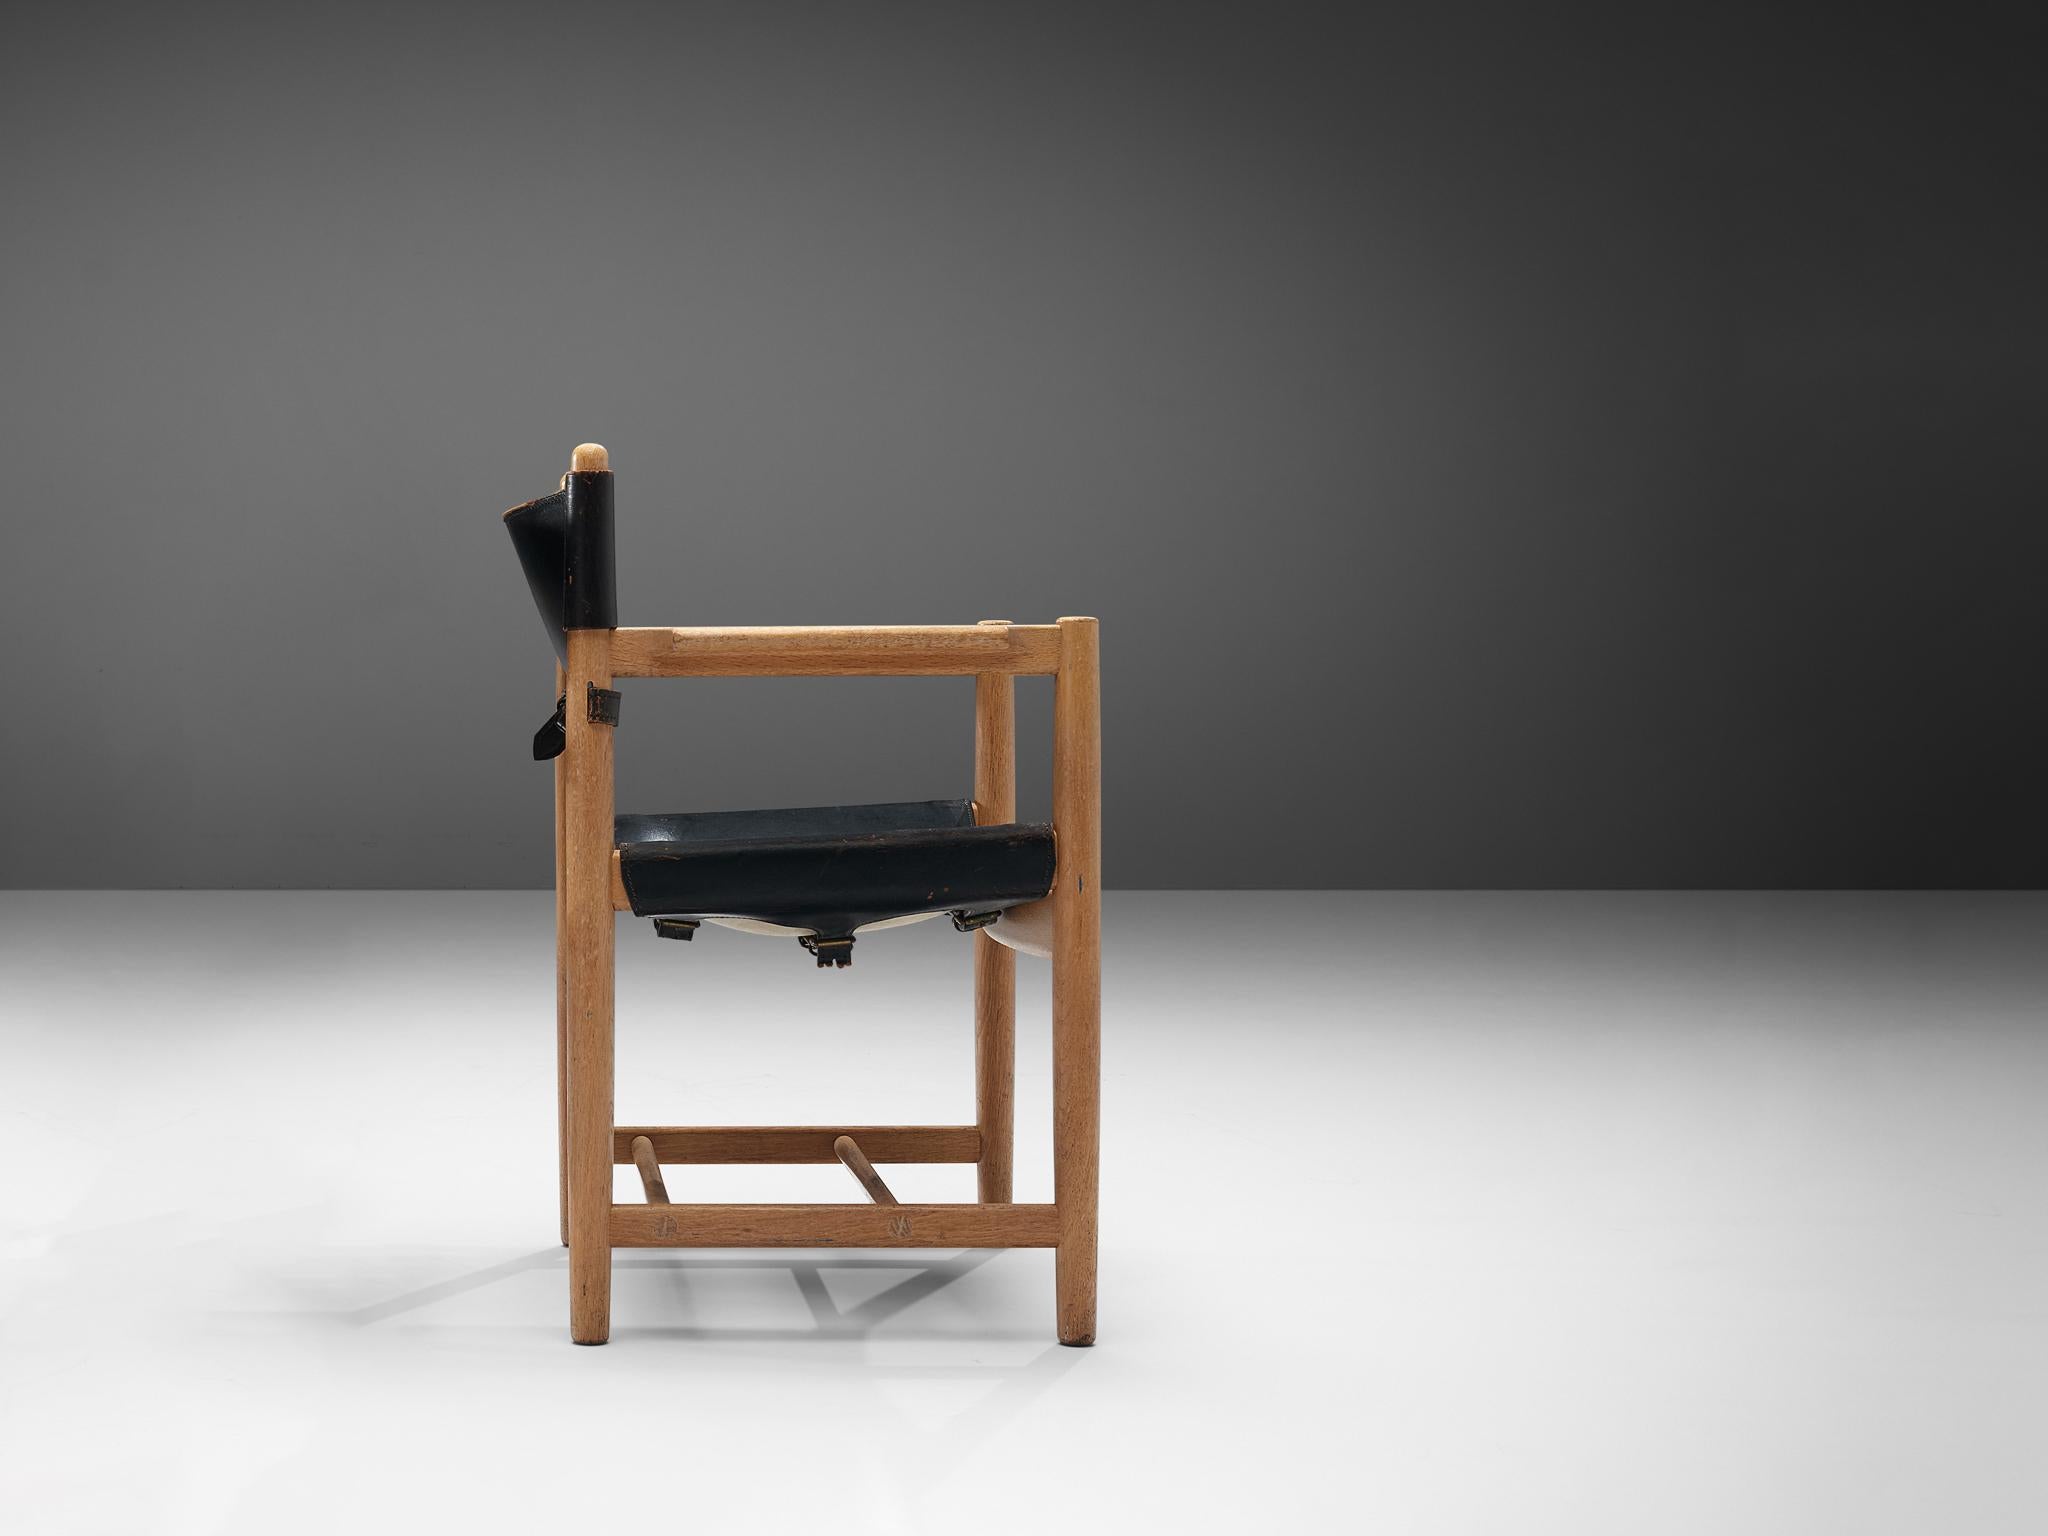 Børge Mogensen for Fredericia Stolefabrik, 'Spanish Dining Chair' model 3238, oak, black leather, Denmark, 1964.

This chair reminds of the classical foldable 'director-chair', yet this design by Danish designer Børge Mogensen (1914-1972) is from